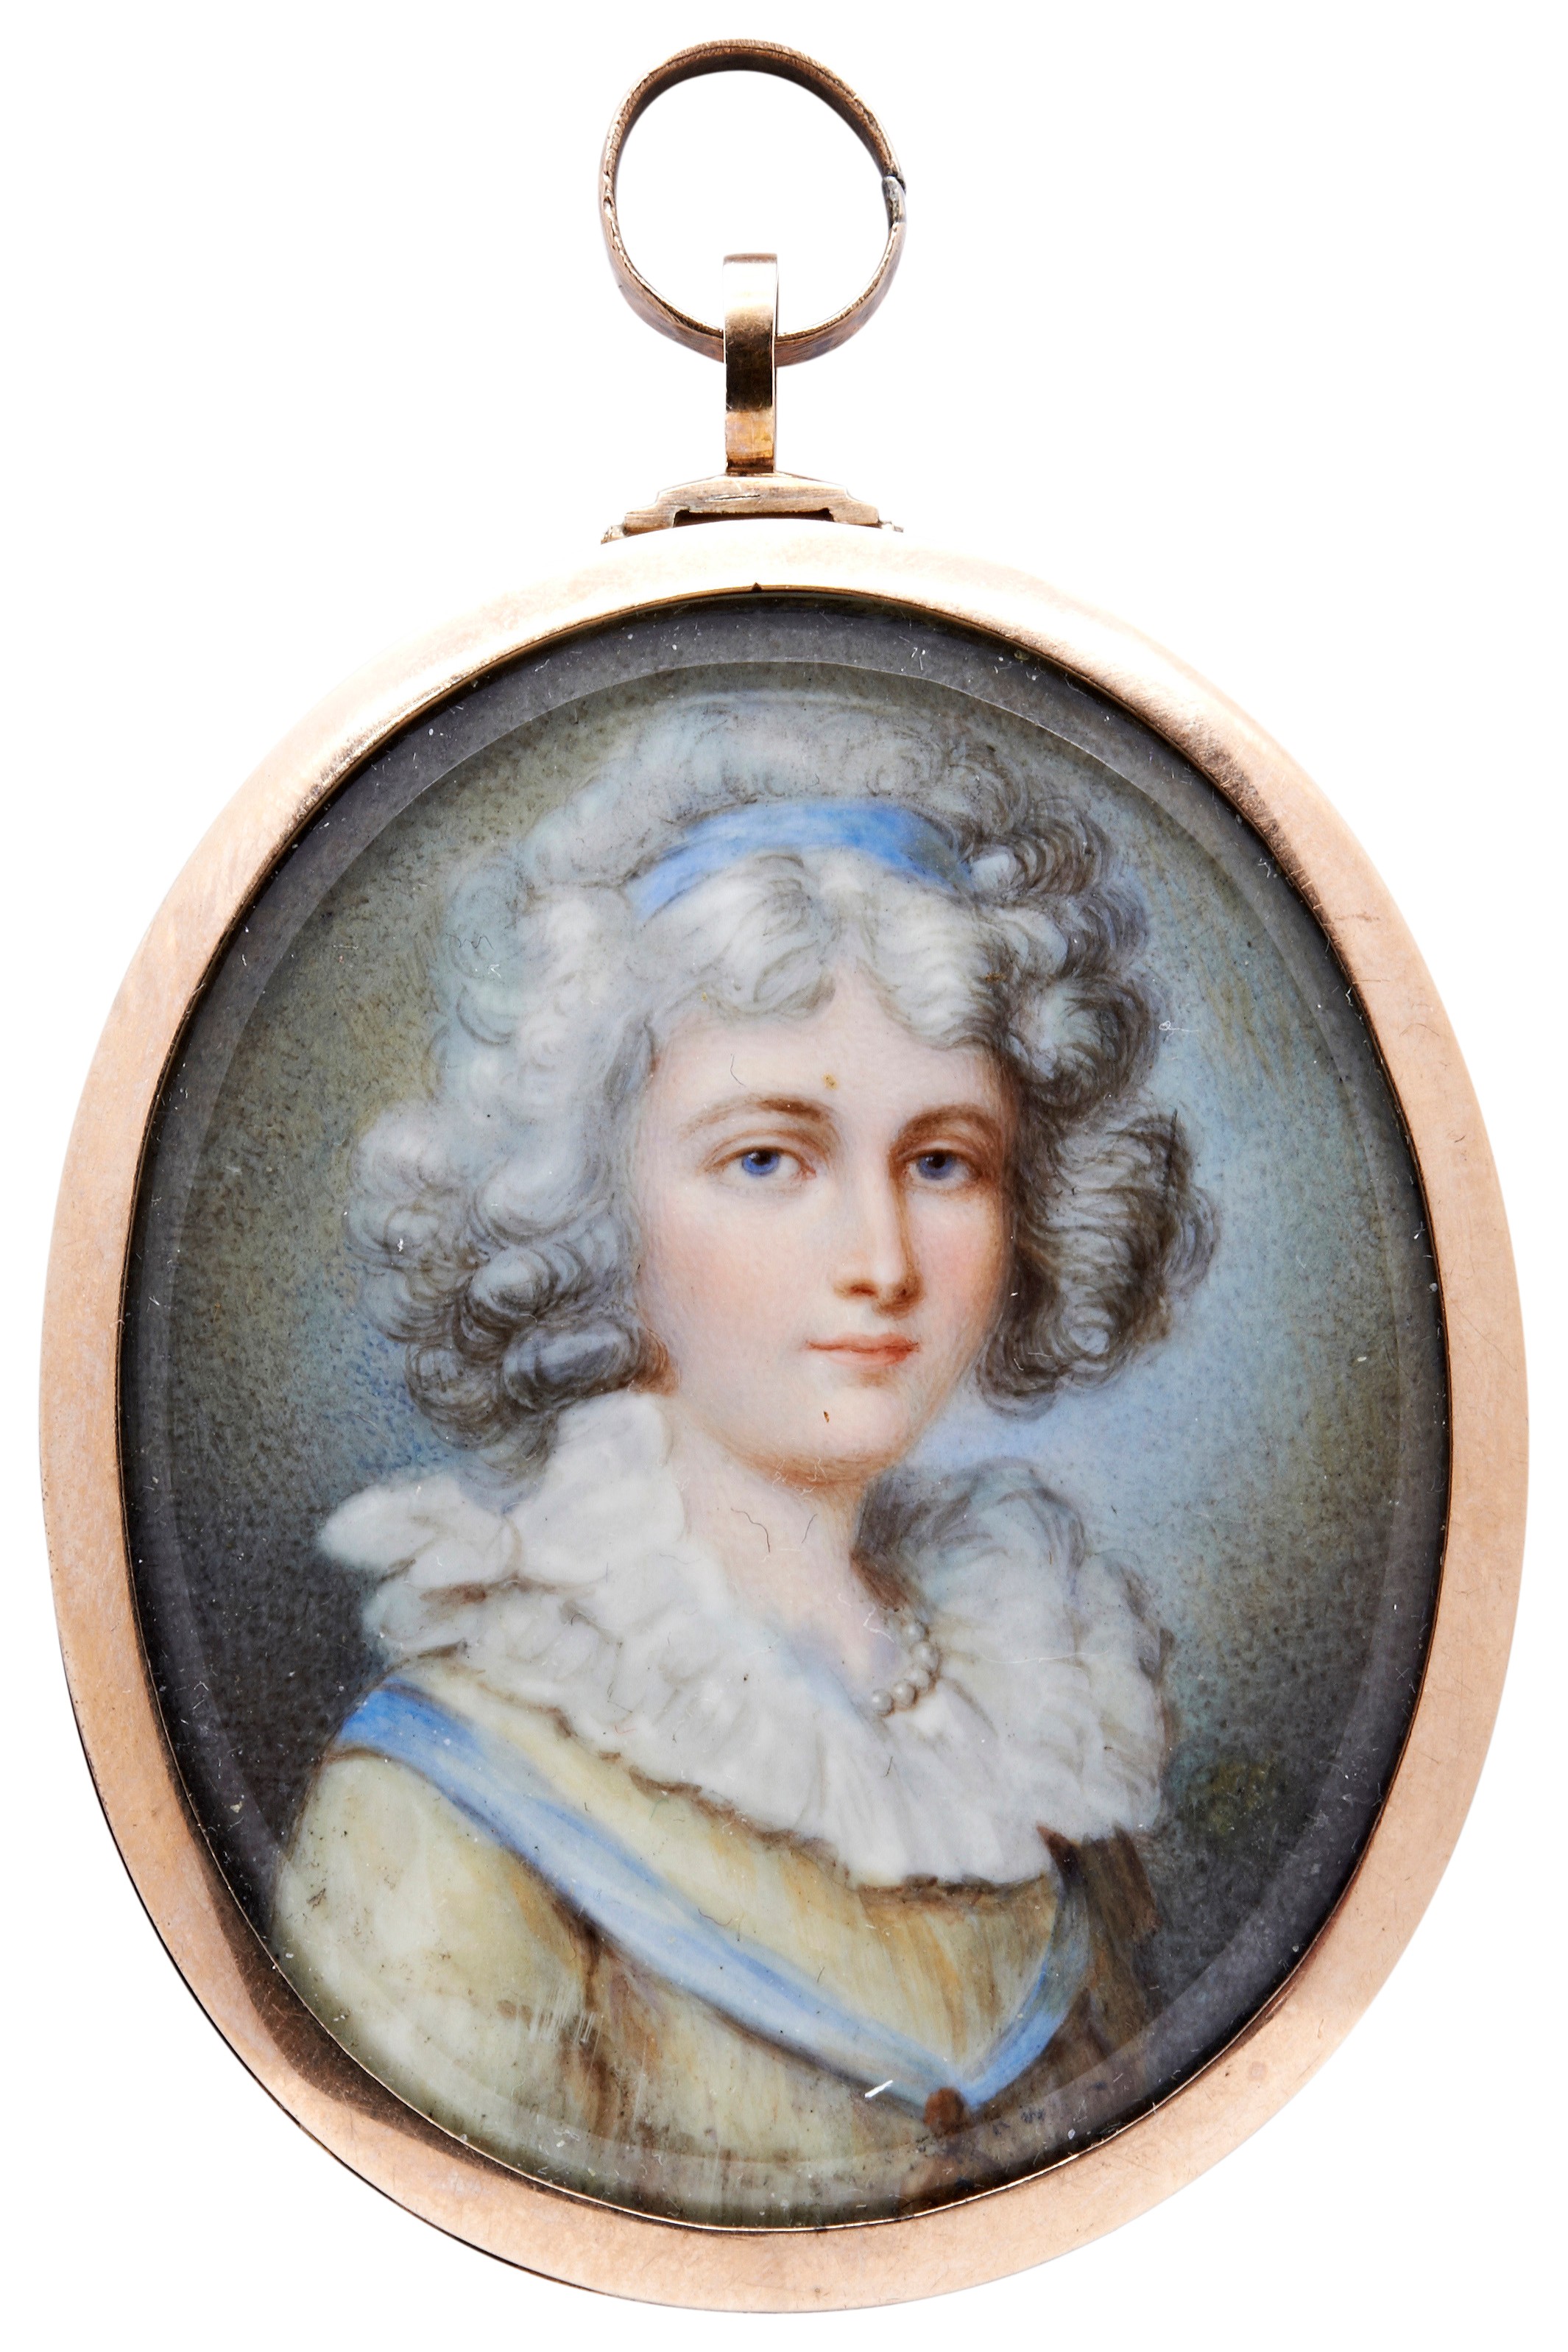 A LATE 18TH CENTURY PORTRAIT MINATURE OF A LADY, with ribbon tied hair, yellow gown and large